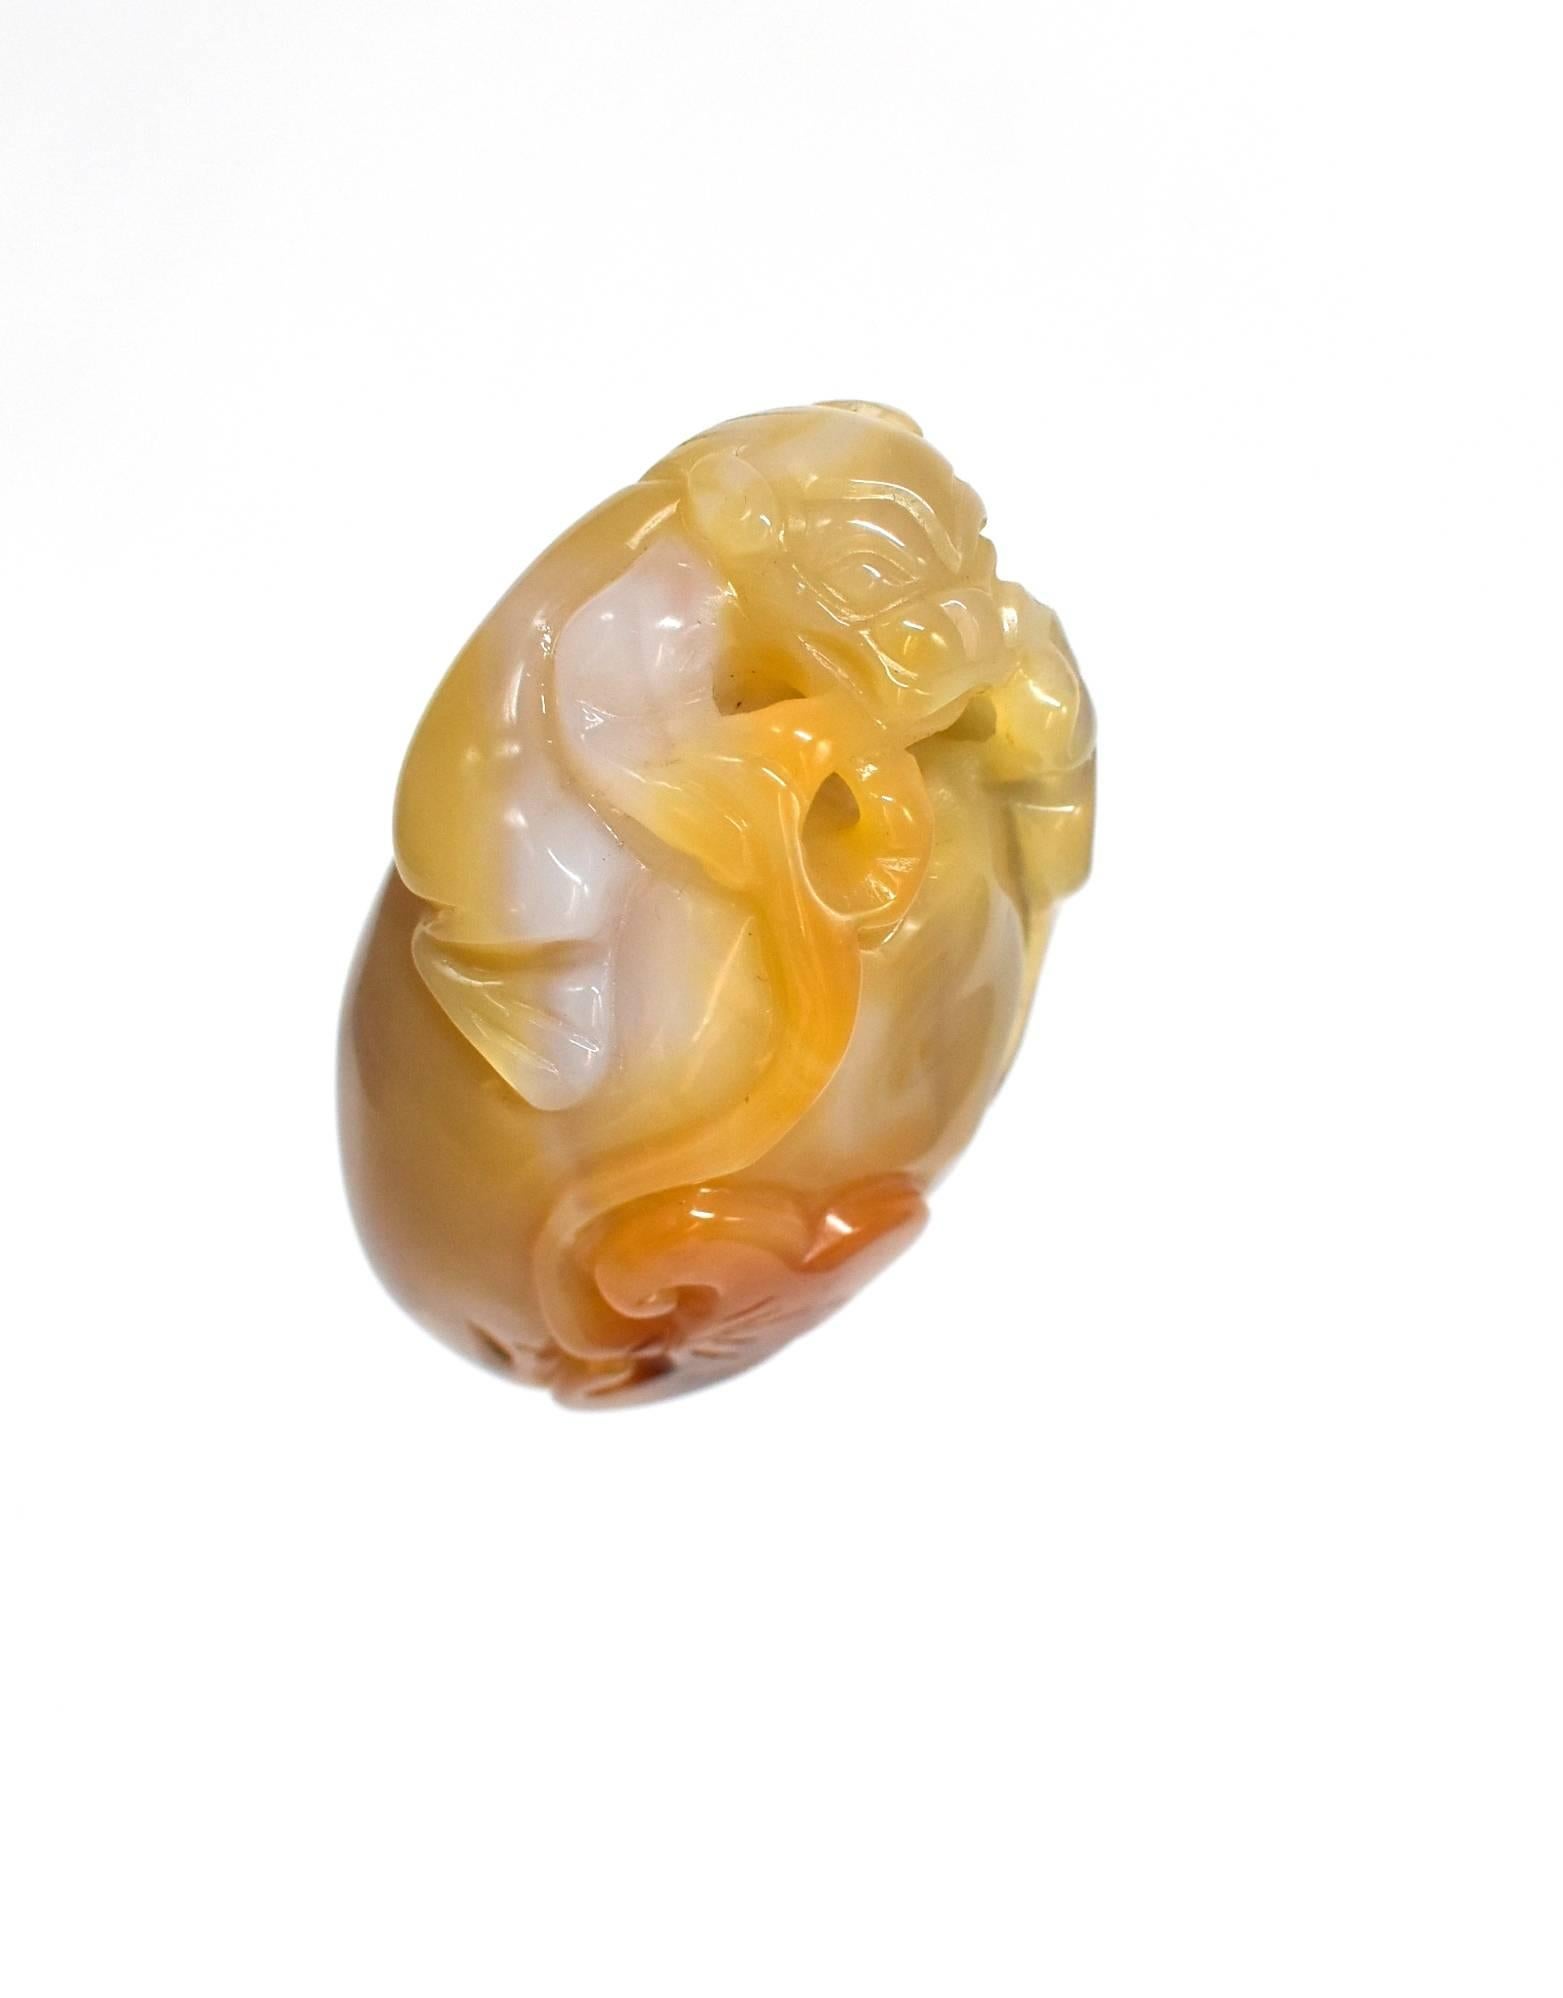 A fine agate sculpture in a hand held form. The piece features a finely carved dragon perched on a rock. The rounded rock has a grown Ling Zhi, which is a symbol of good health and longevity. The agate is perfectly smooth and pleasant to touch and